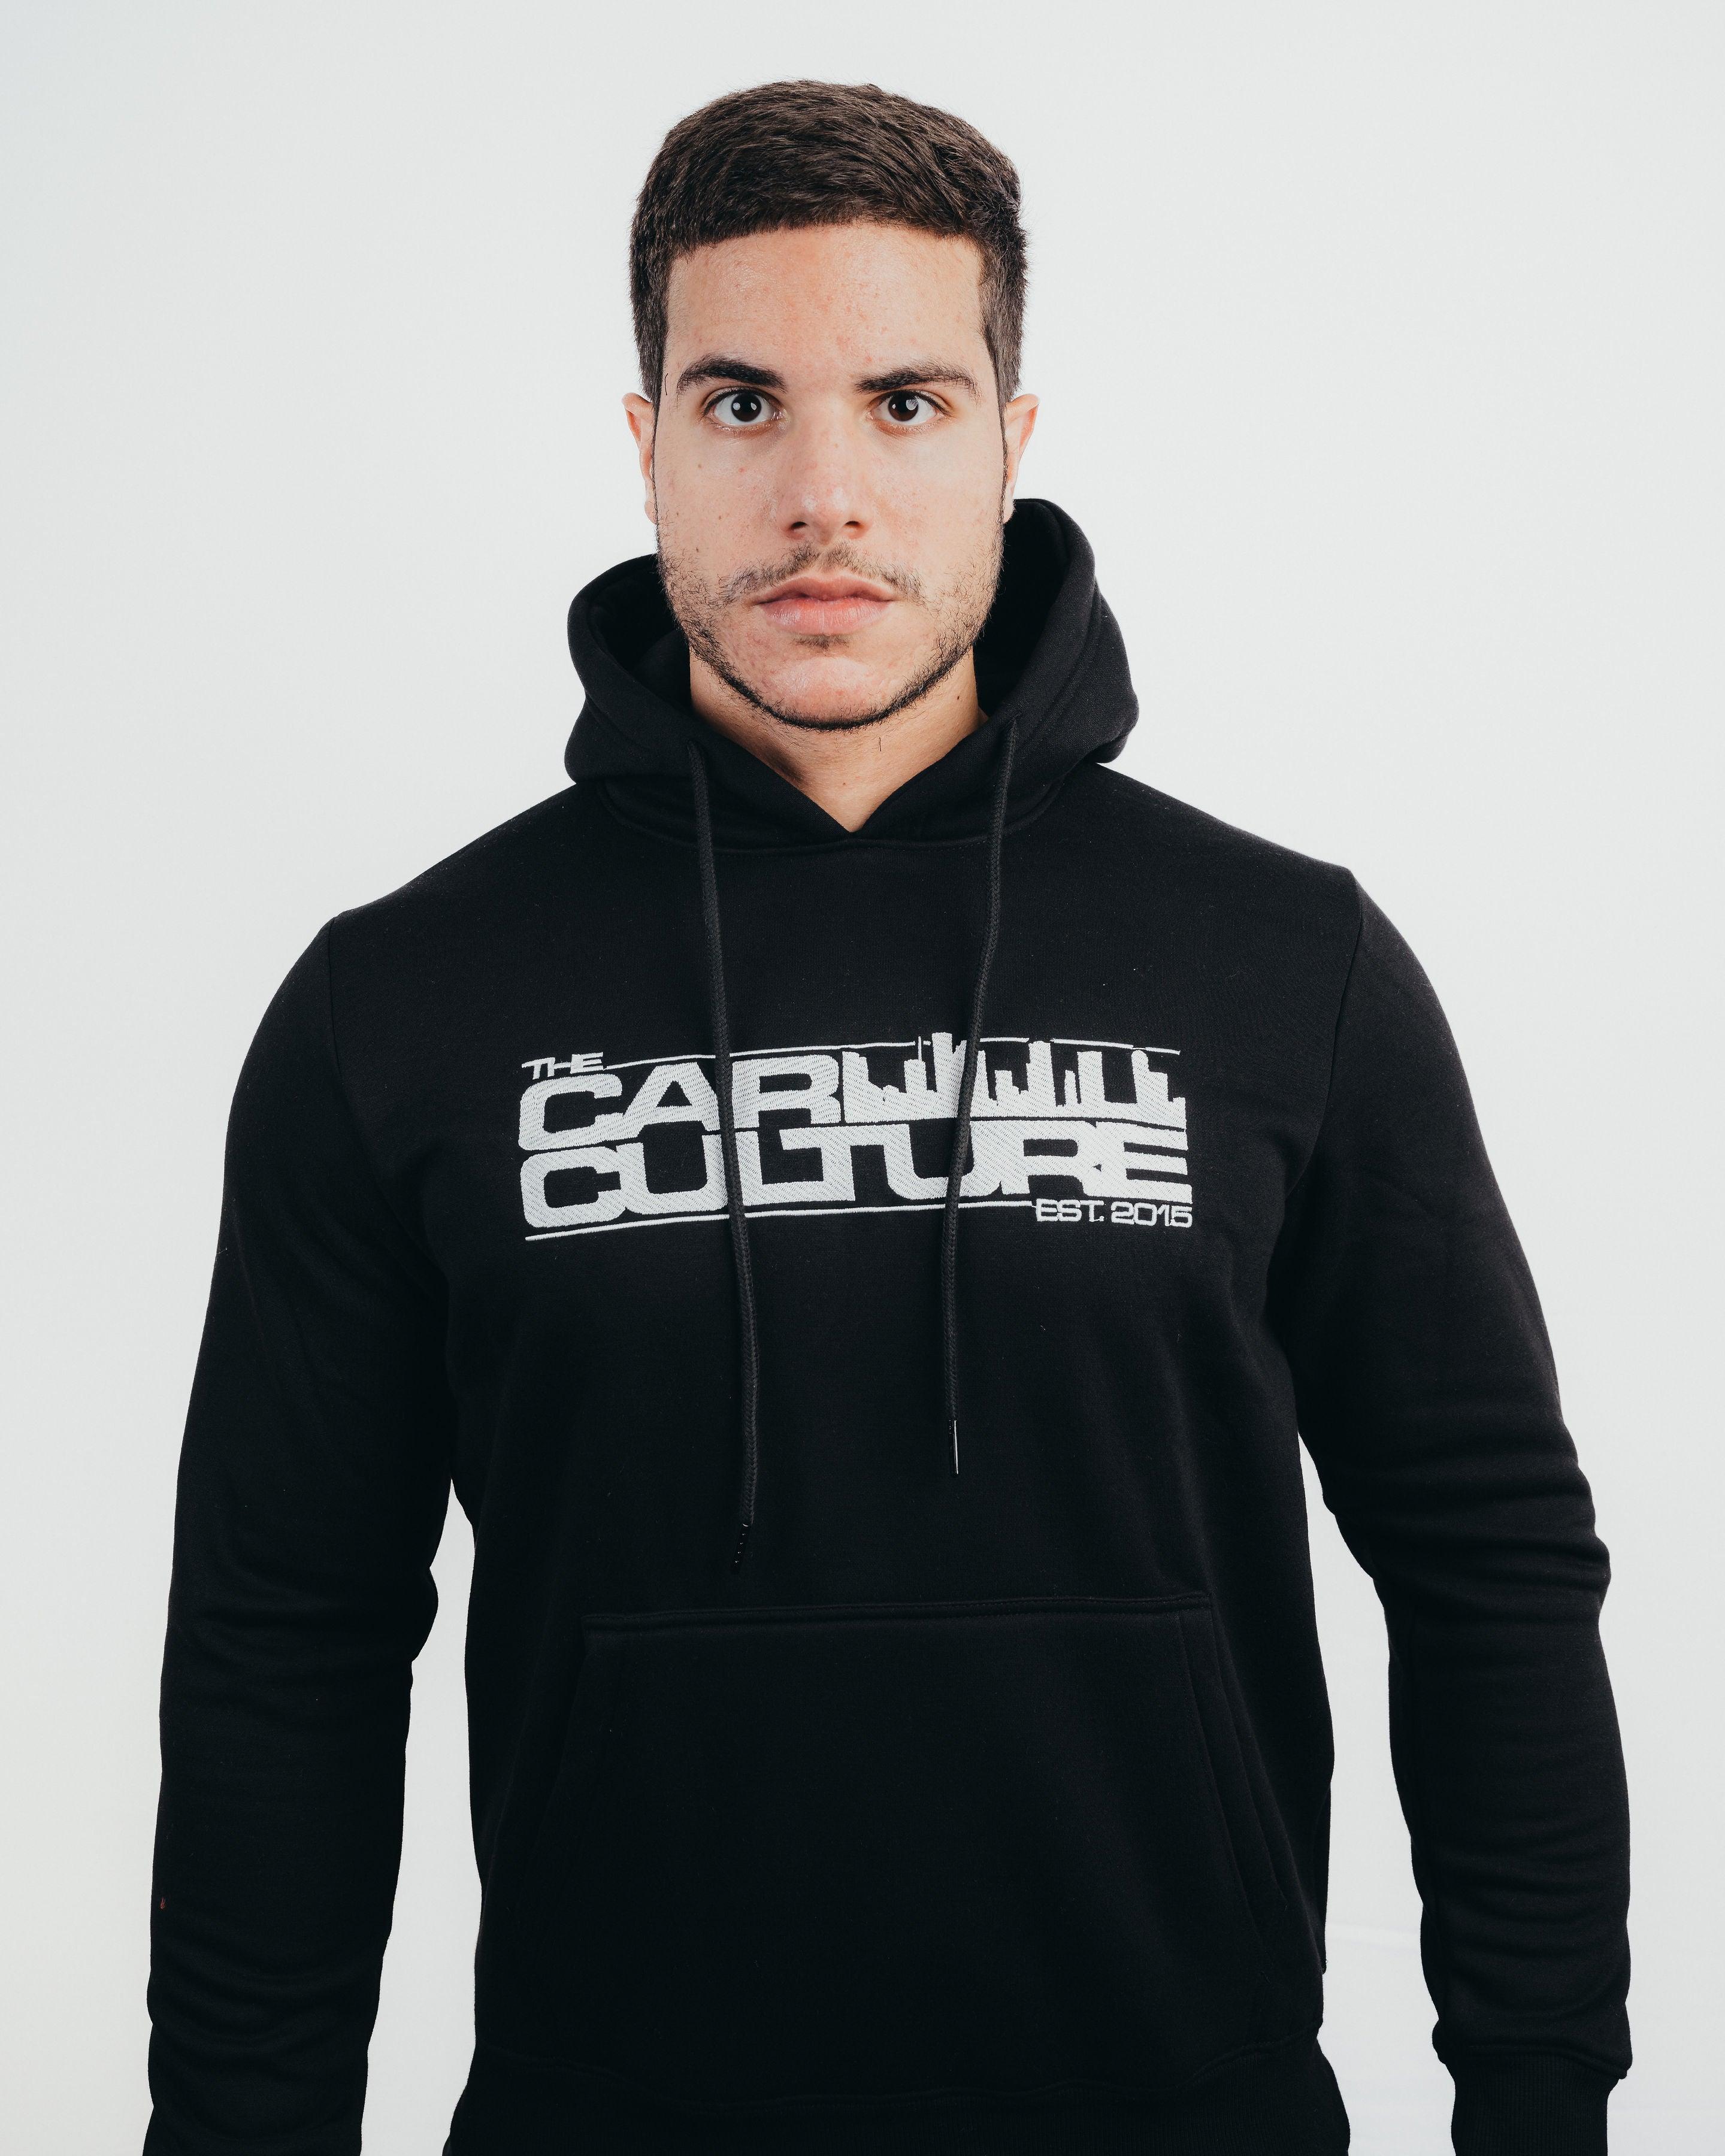 Superdry Hoodies, T-Shirts for Men, Superdry Clothing Canada